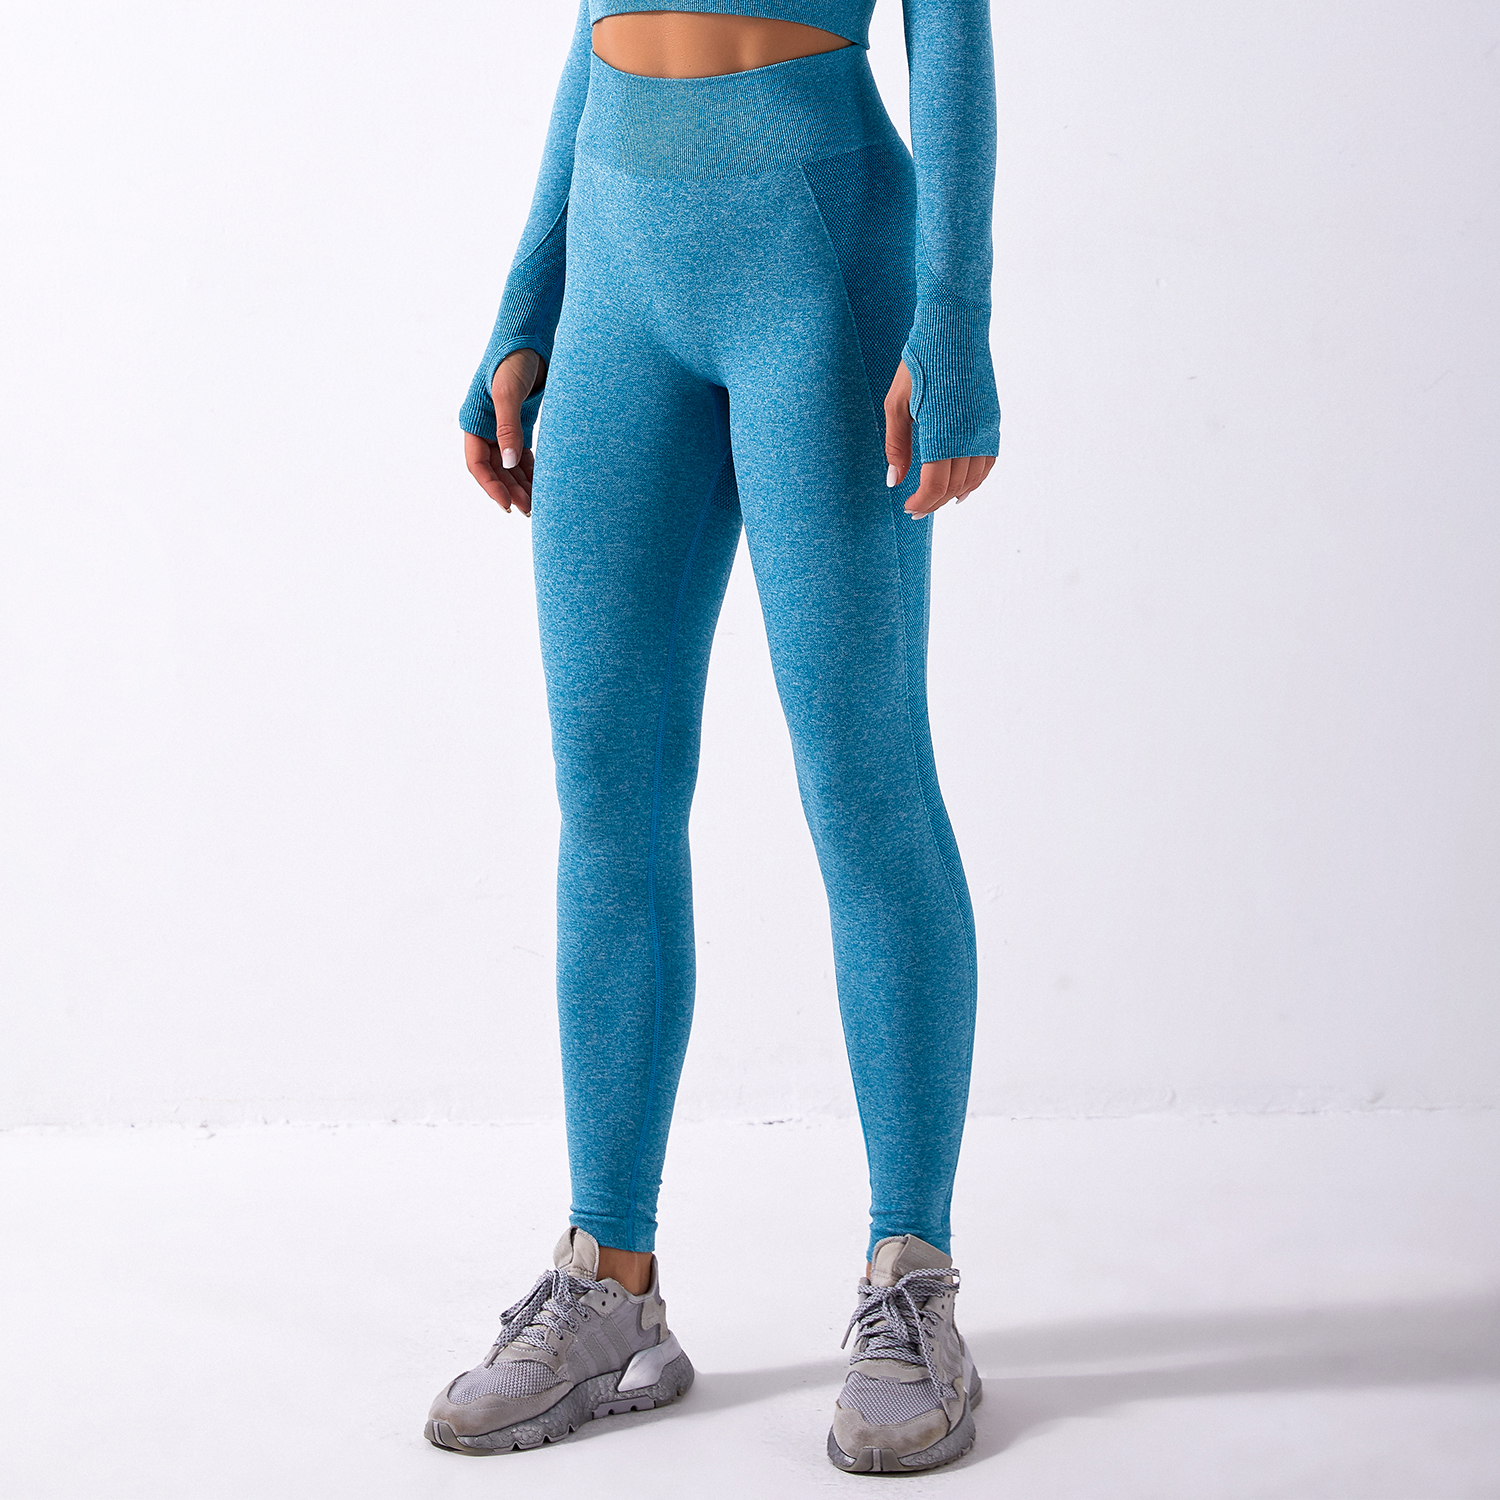 Alphalete Amplify Leggings Oceania Continent  International Society of  Precision Agriculture